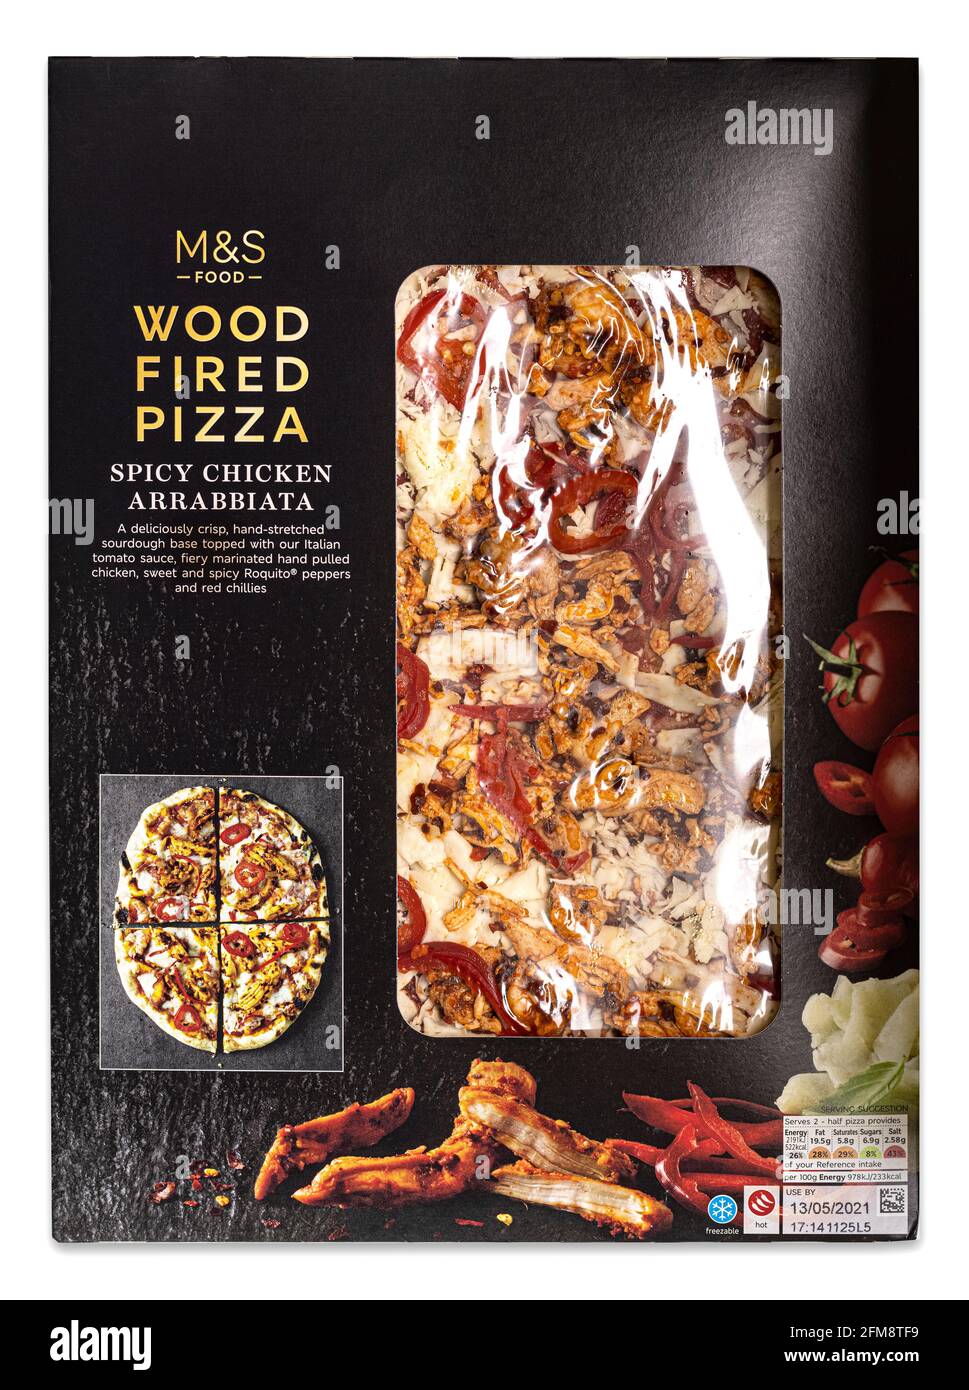 Marks And Spencer Food Spicy Chicken Arrabbiata Wood Fired Pizza on a white background Stock Photo